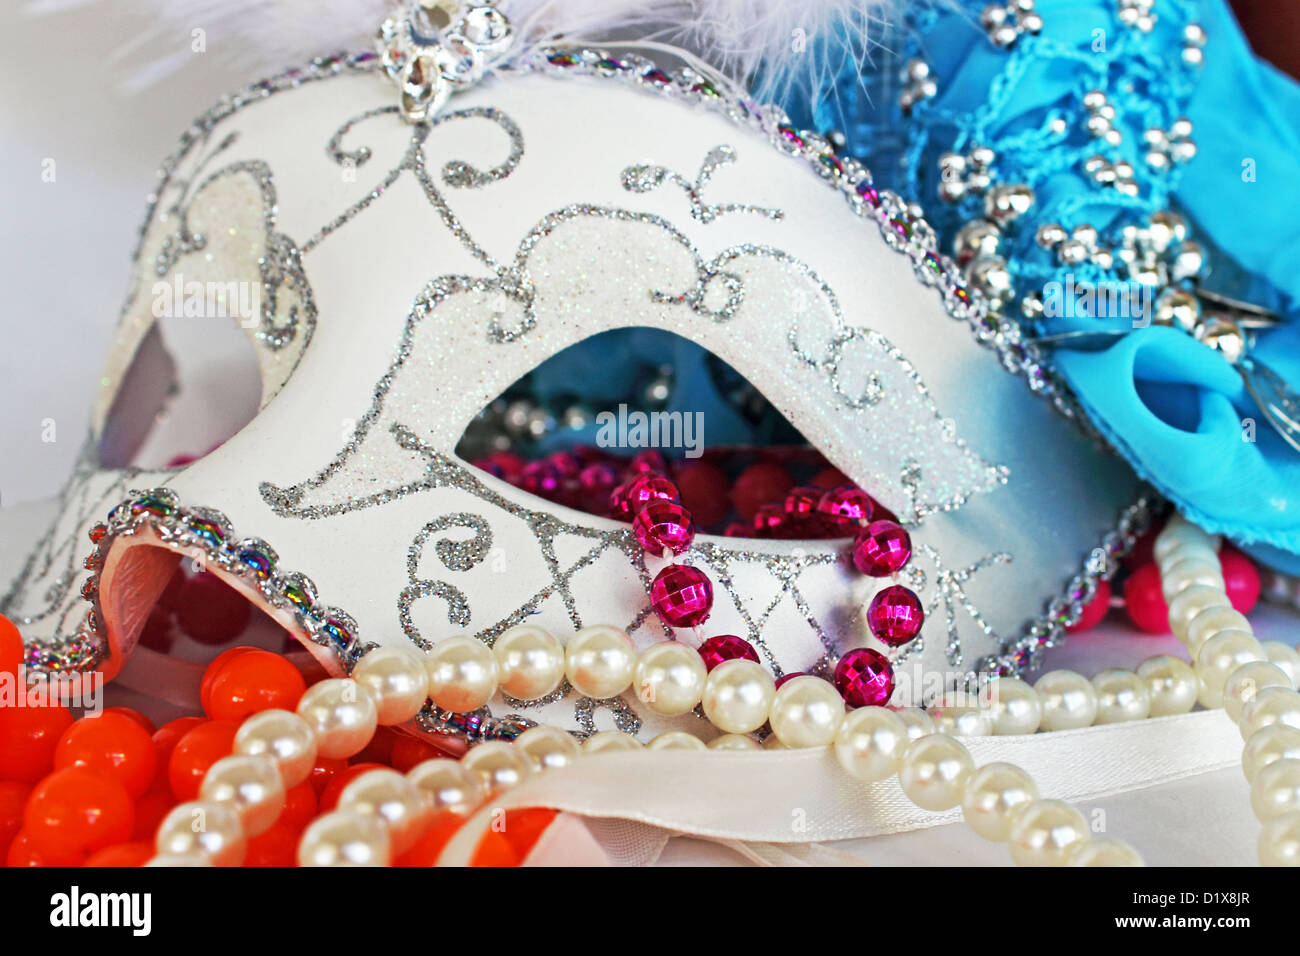 A white and glittery masquerade ball mask with party beads and pearls Stock Photo